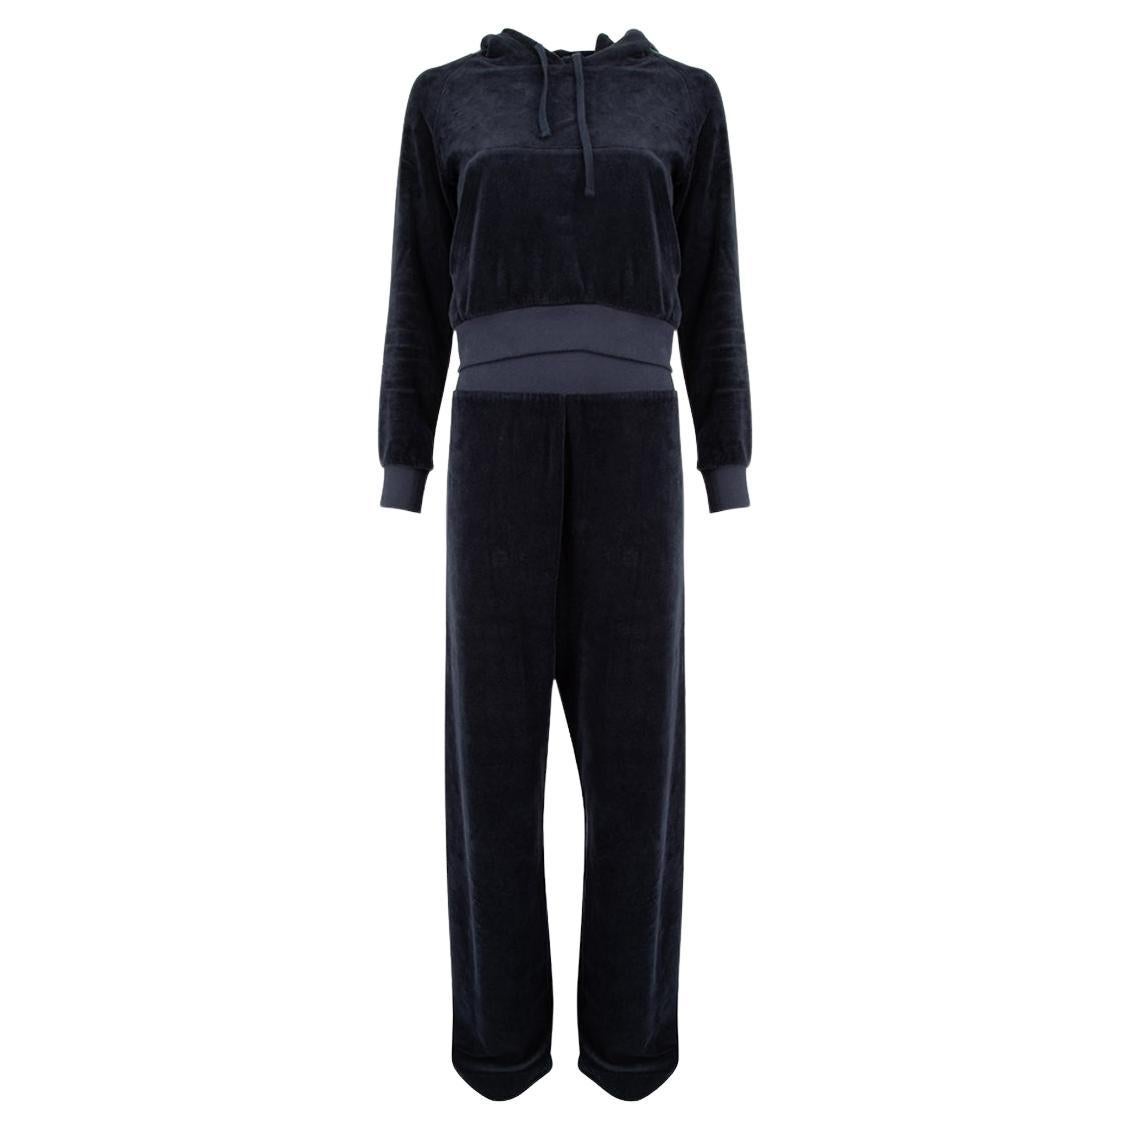 Pre-Loved Vetements x Juicy Couture Women's Navy Velour Embellished Tracksuit 